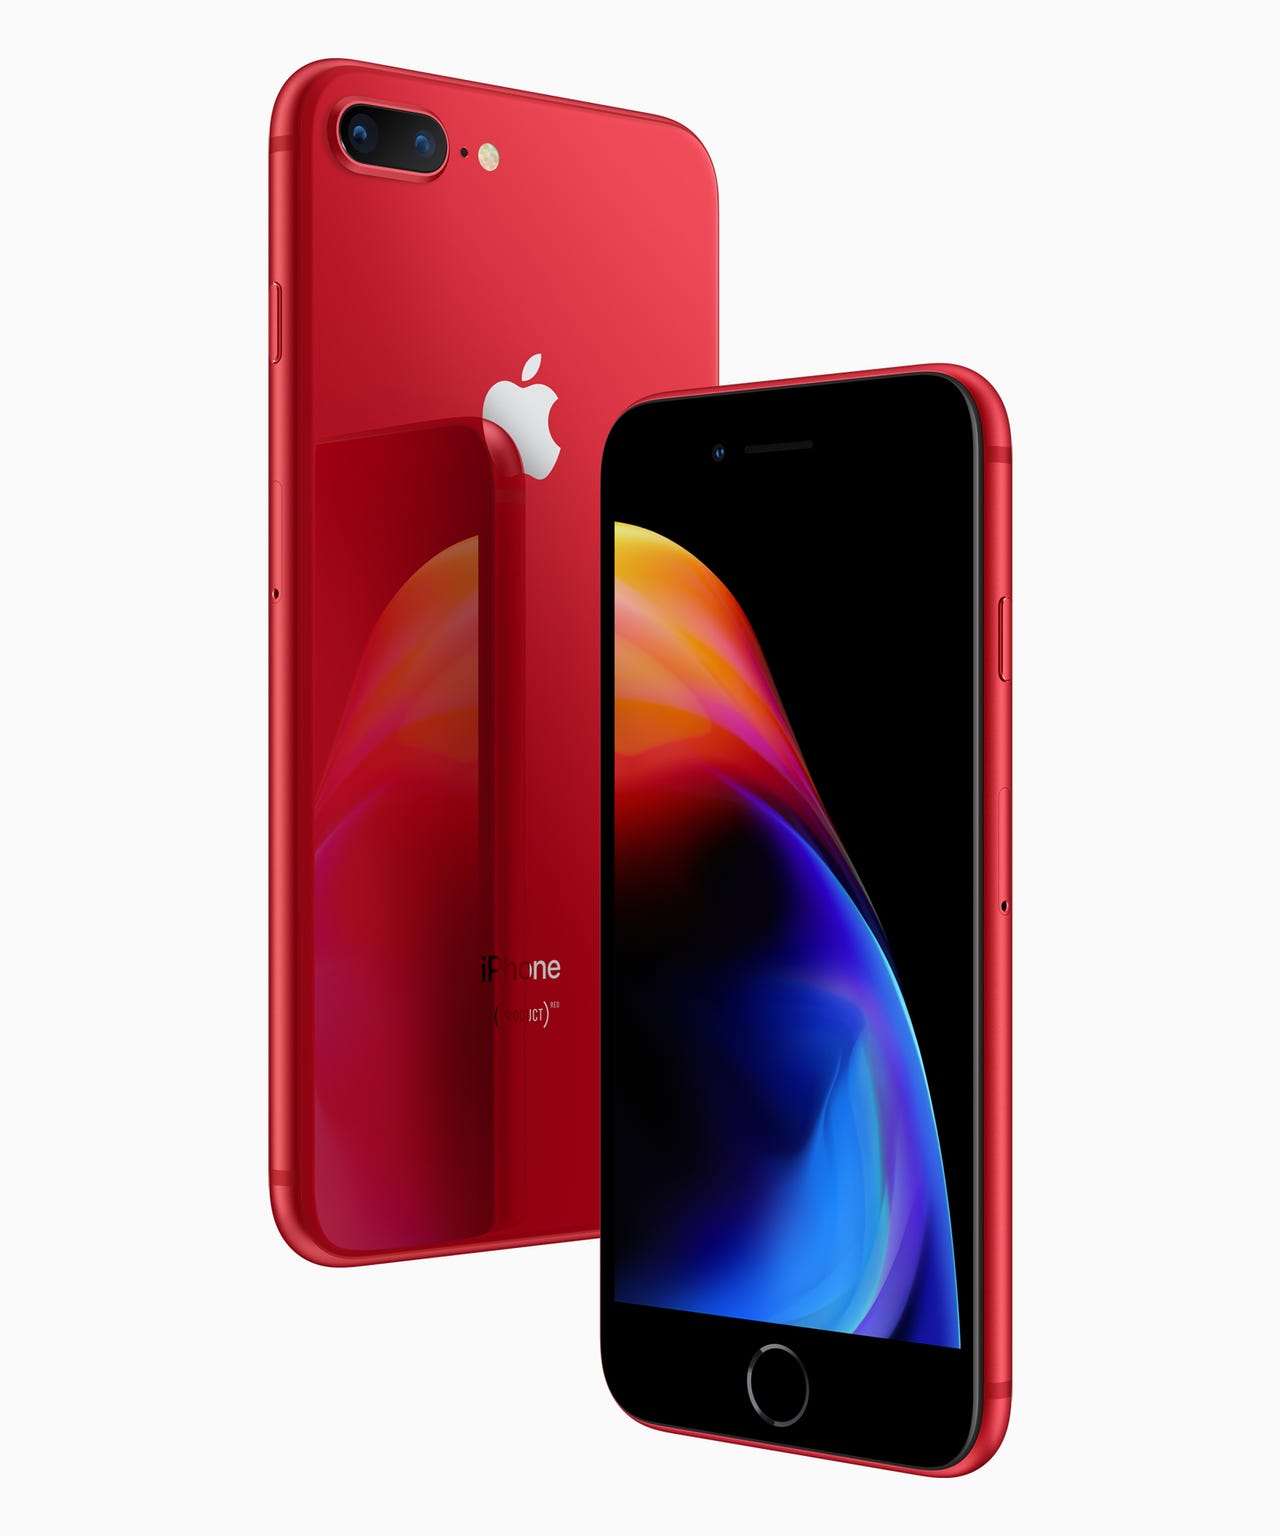 iphone8-iphone8plus-product-redfront-back041018.jpg